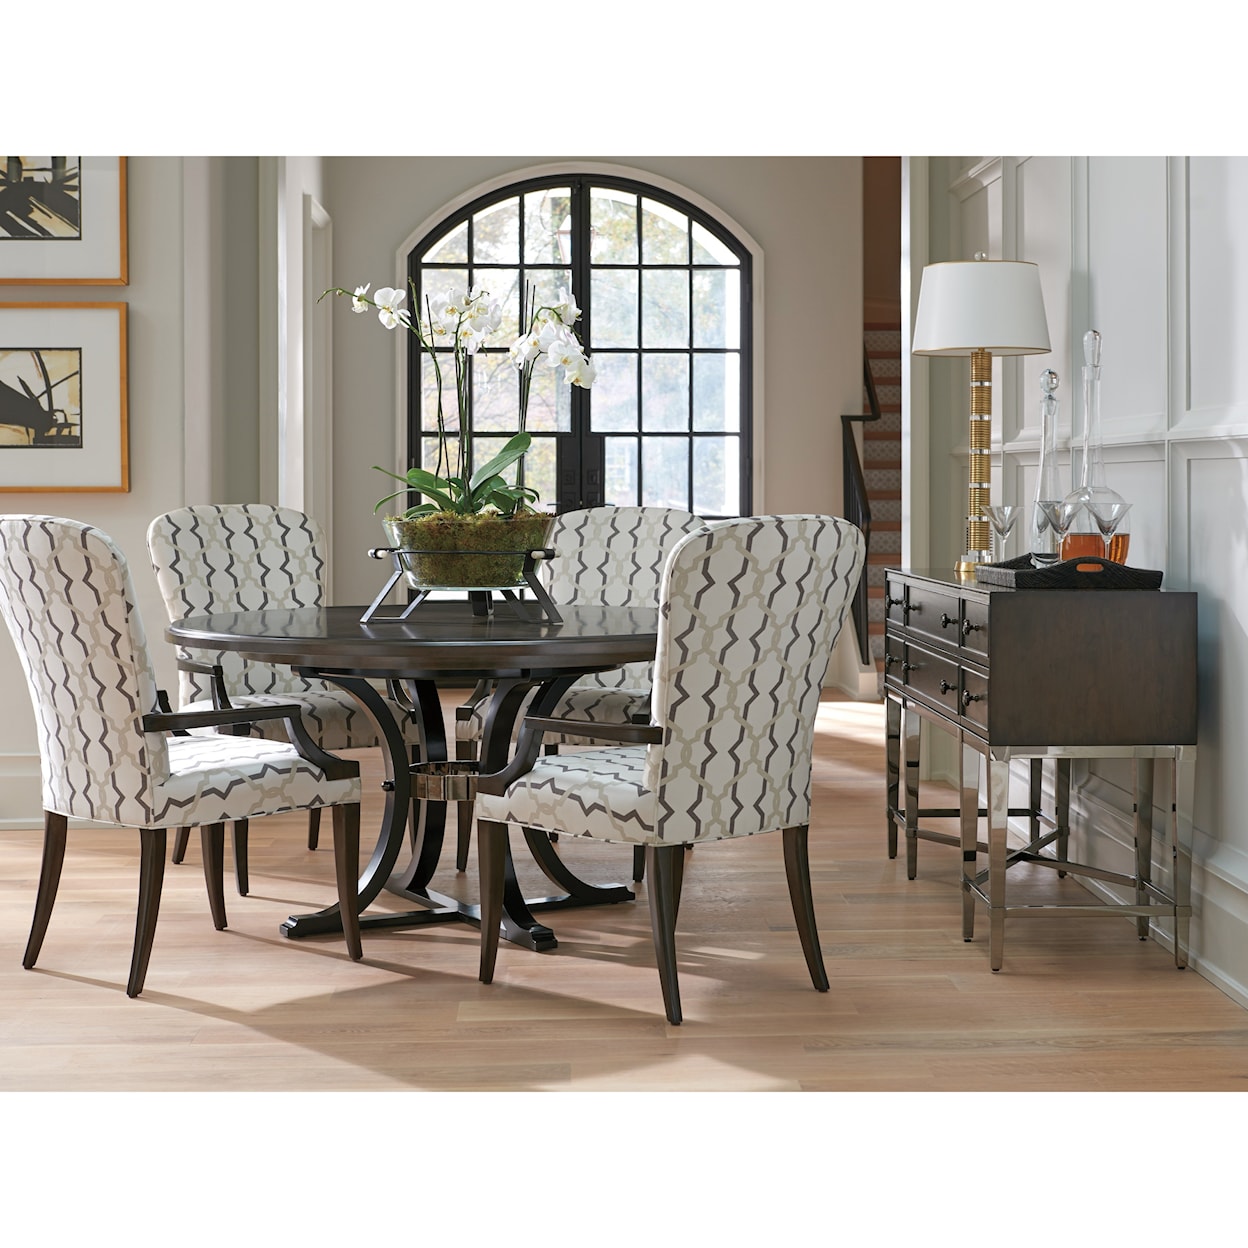 Barclay Butera Brentwood 5 Pc Dining Set